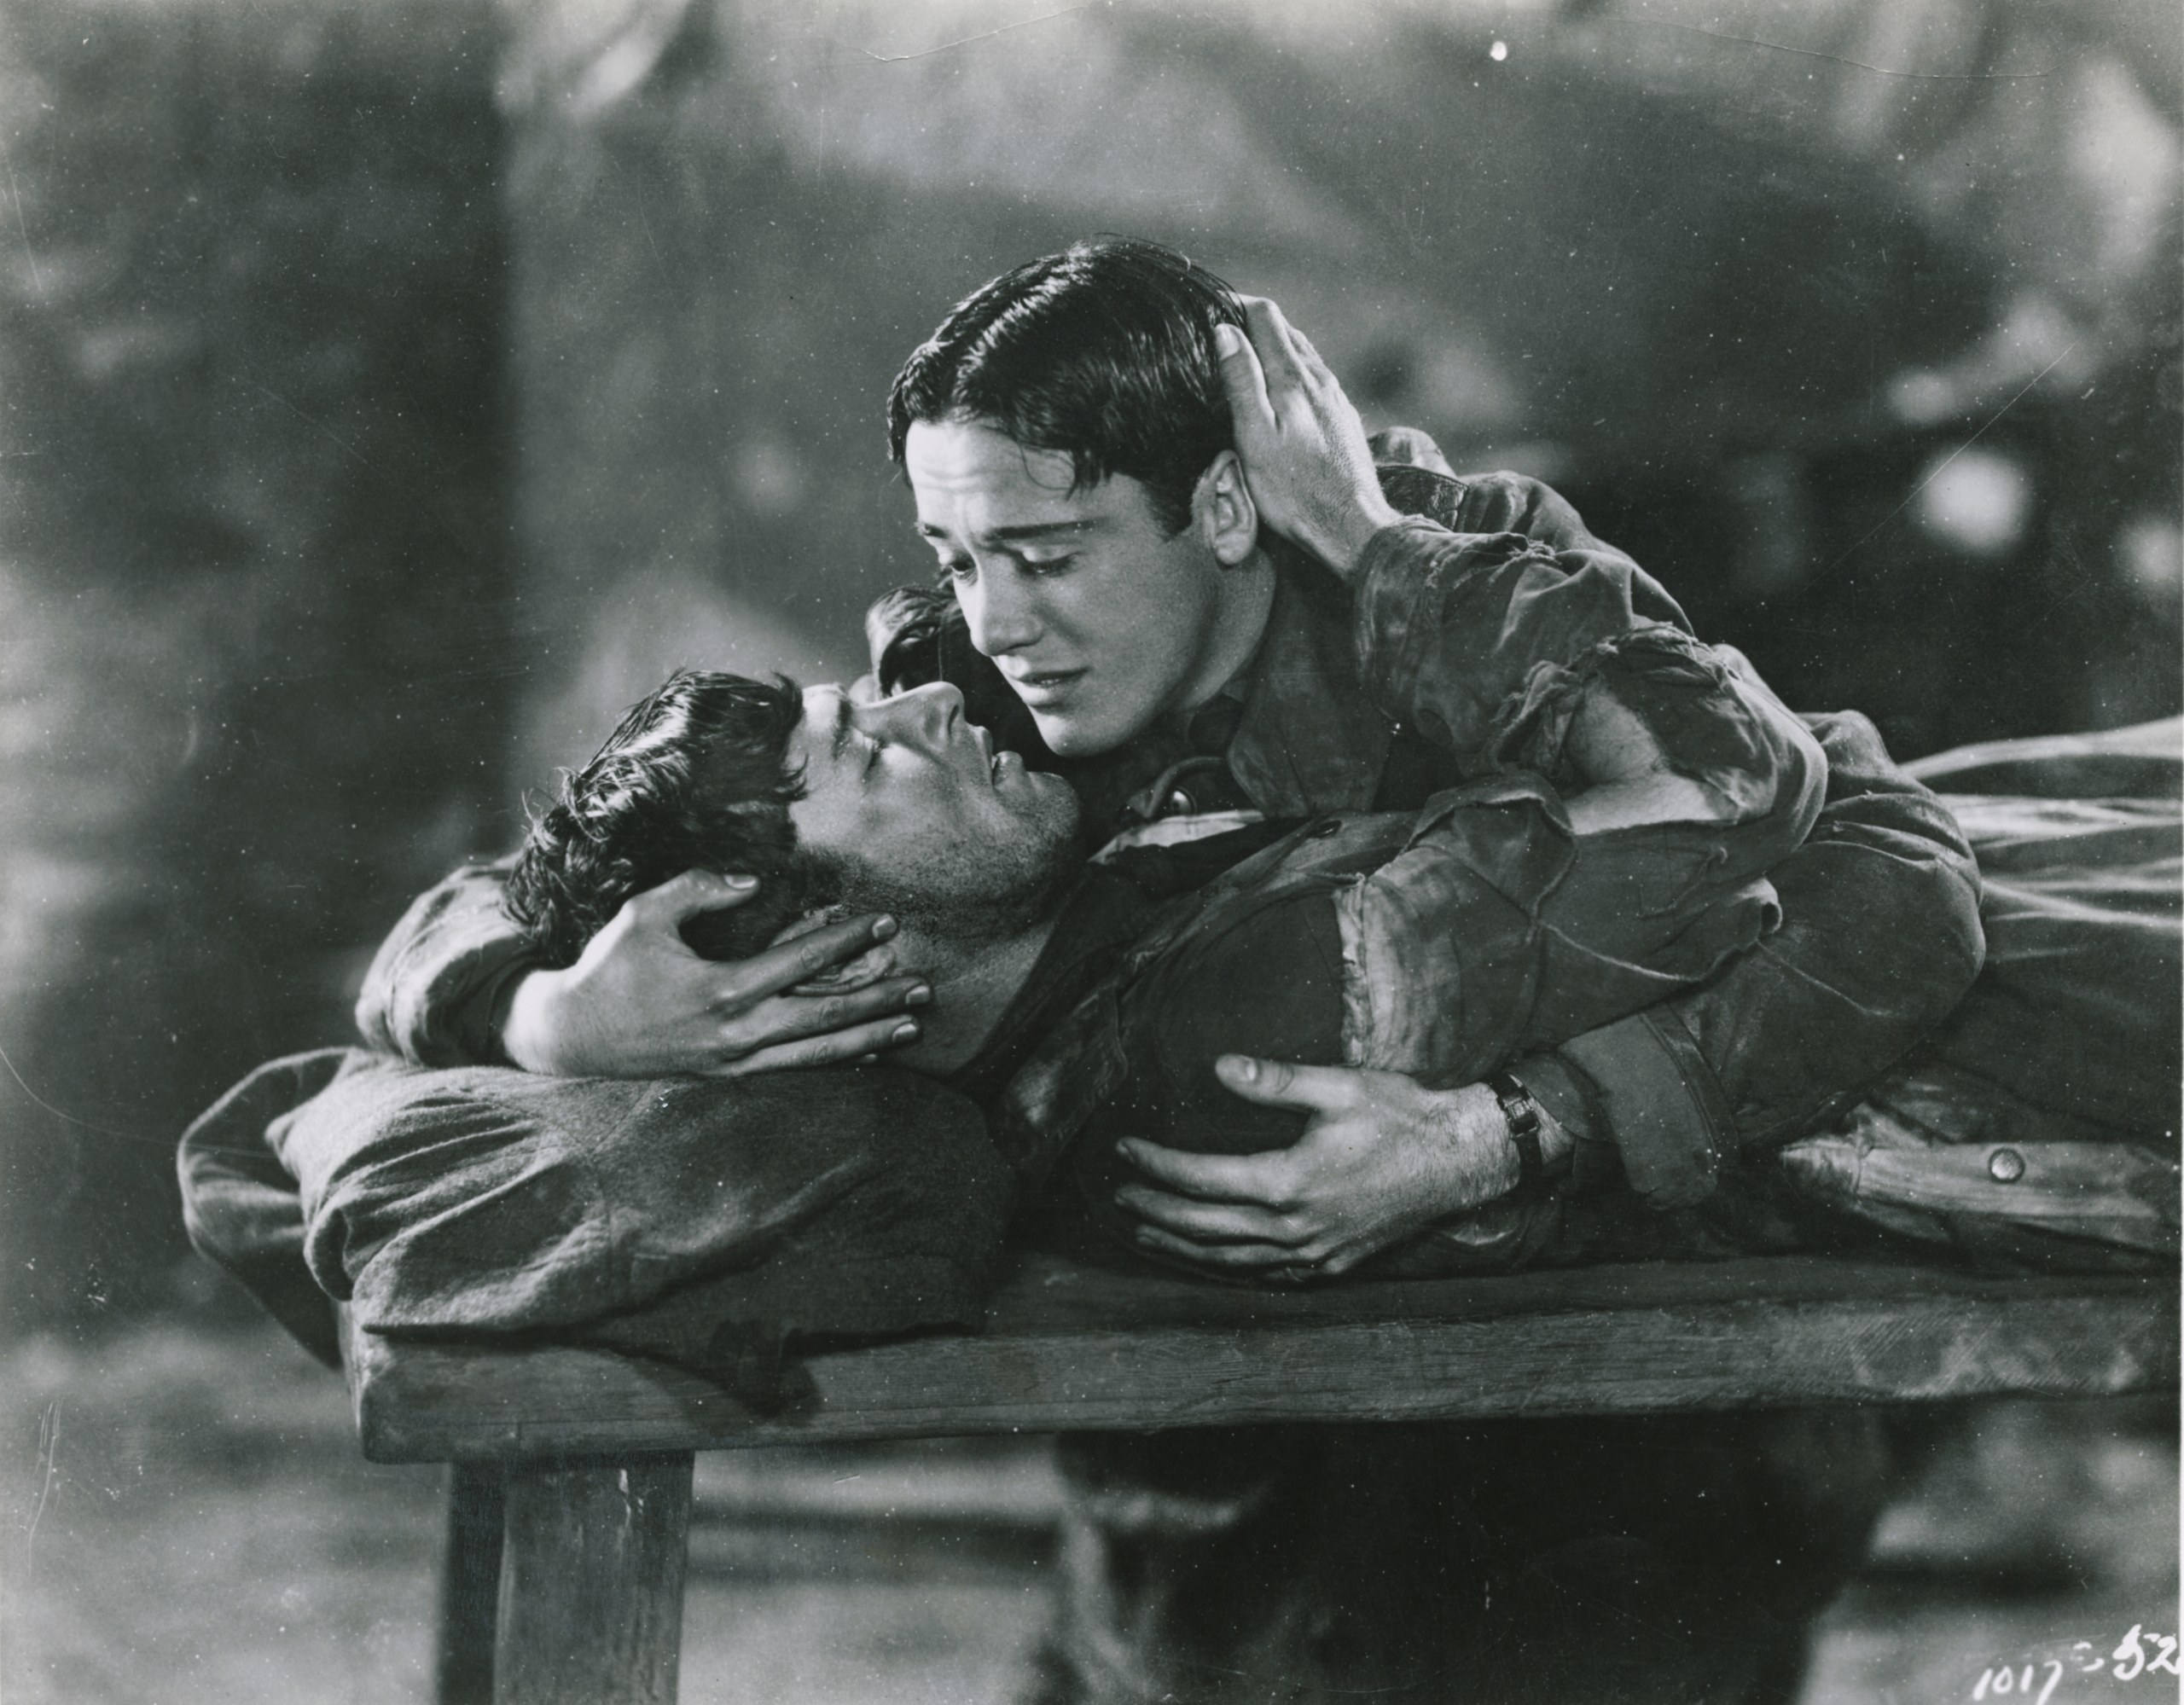 Charles (Buddy) Rogers holds and comforts Richard Arlen on his deathbed in a scene from the movie Wings. (Photo by John Springer Collection/CORBIS/Corbis via Getty Images). 

A Pre-Production code film that showed the first official gay kiss. Wellman, William and d d'Arrast, Harry, Dirs. Wings. 1927